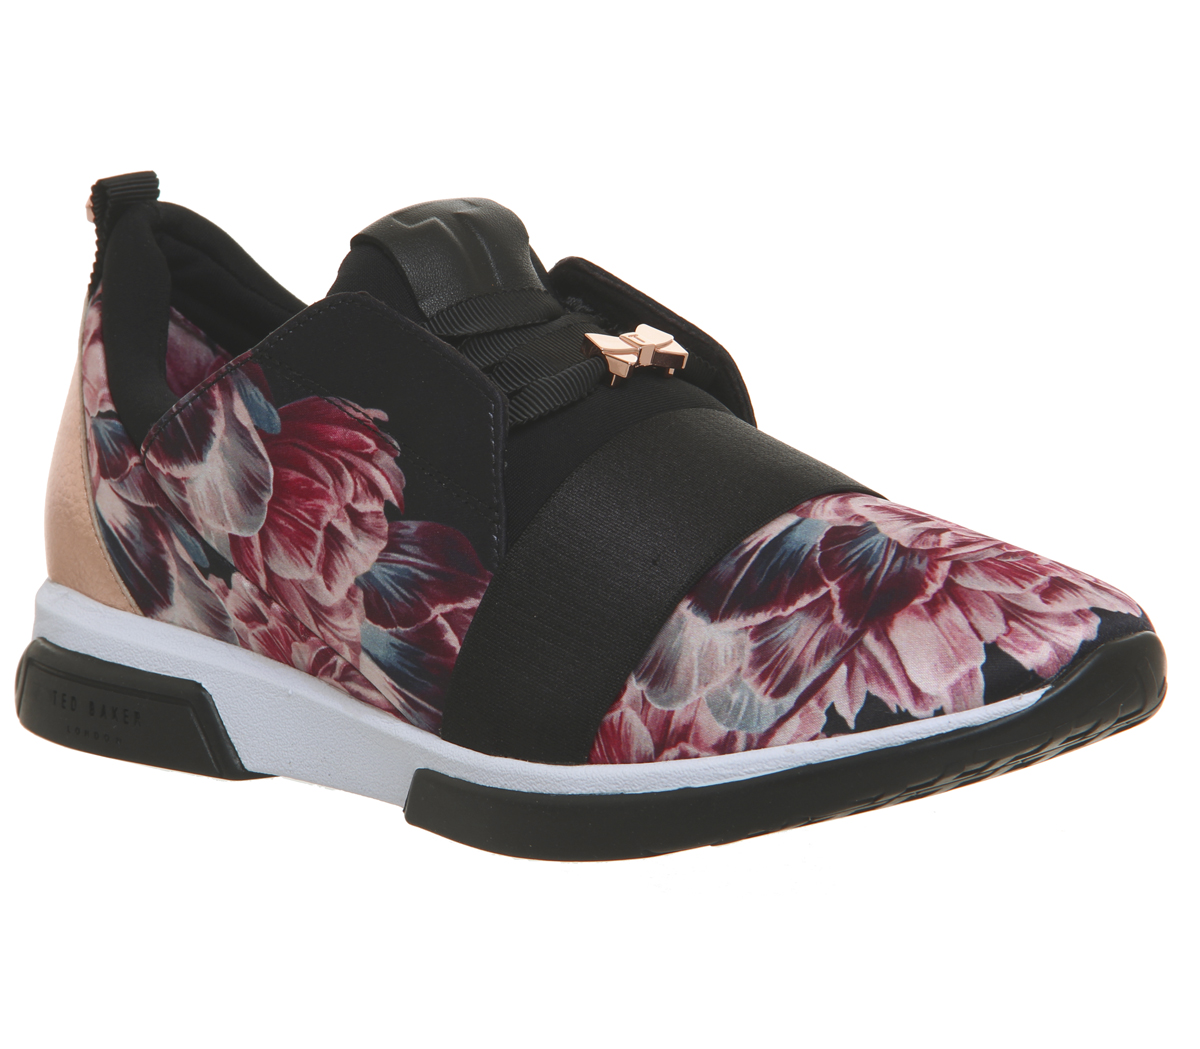 Ted Baker Cepap 2 Trainres Black Tranquility - Women's Trainers